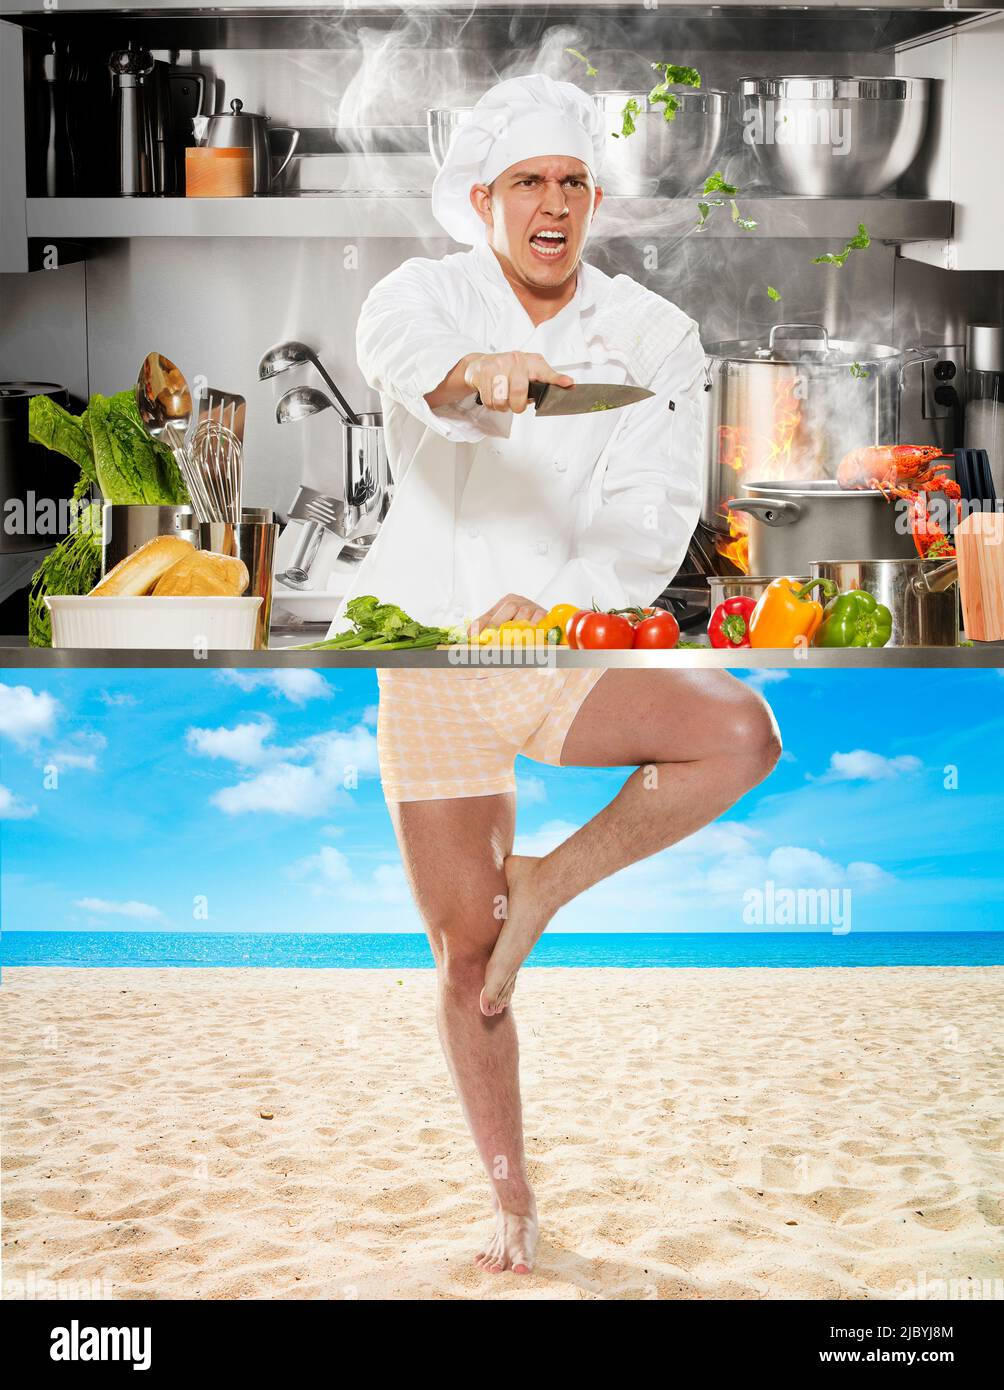 Split screen of angry chef and yoga pose on beach Stock Photo